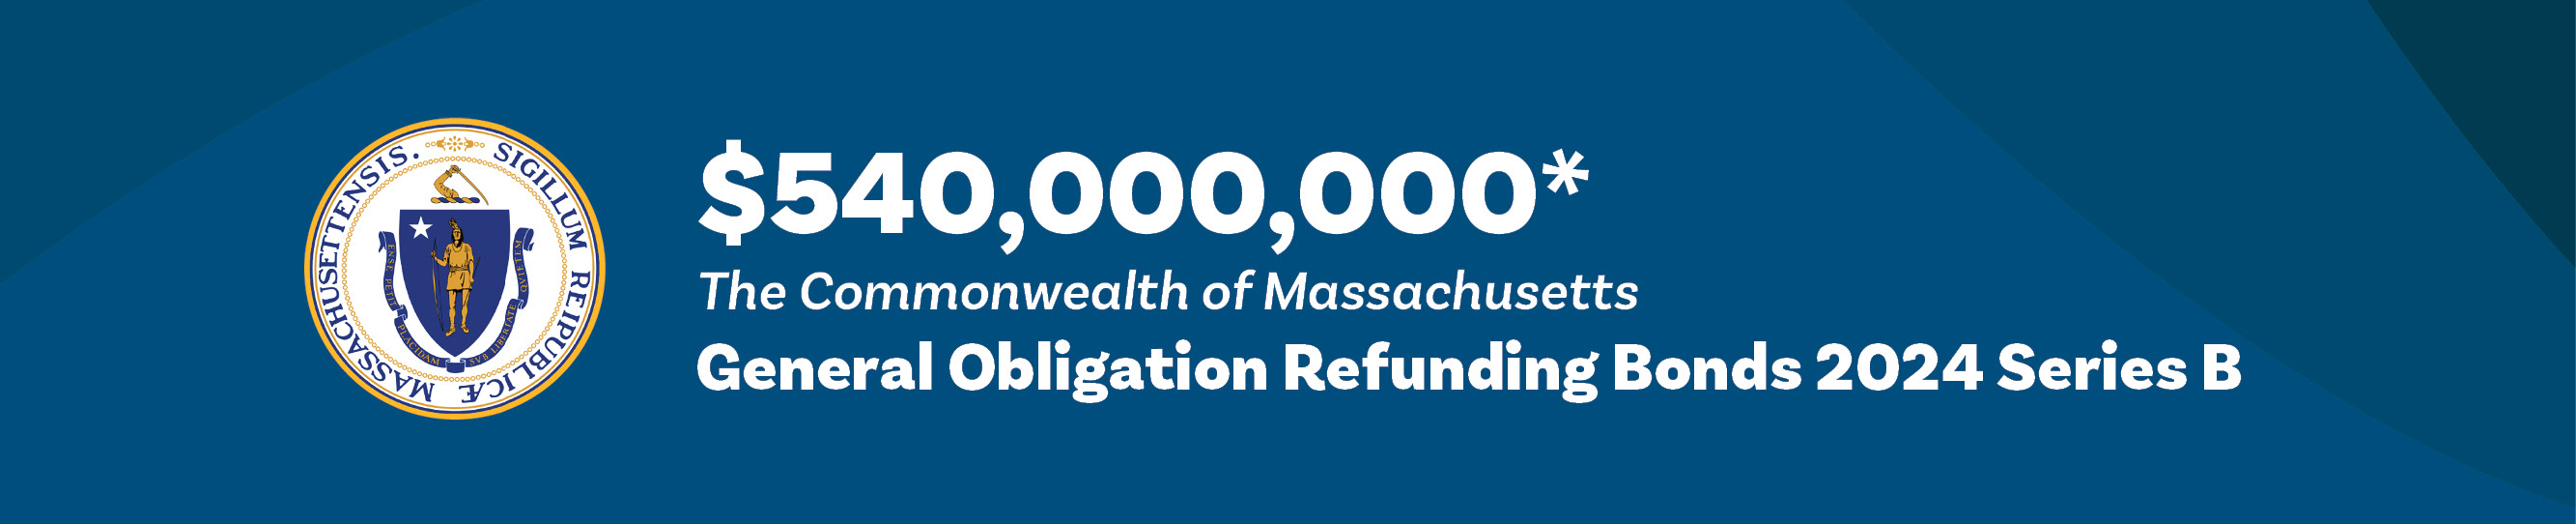 Blue Geometric header that reads 'General Obligation Refunding Bonds 2024 Series B, $540 million' in white text with the seal of the Commonwealth of Massachusetts